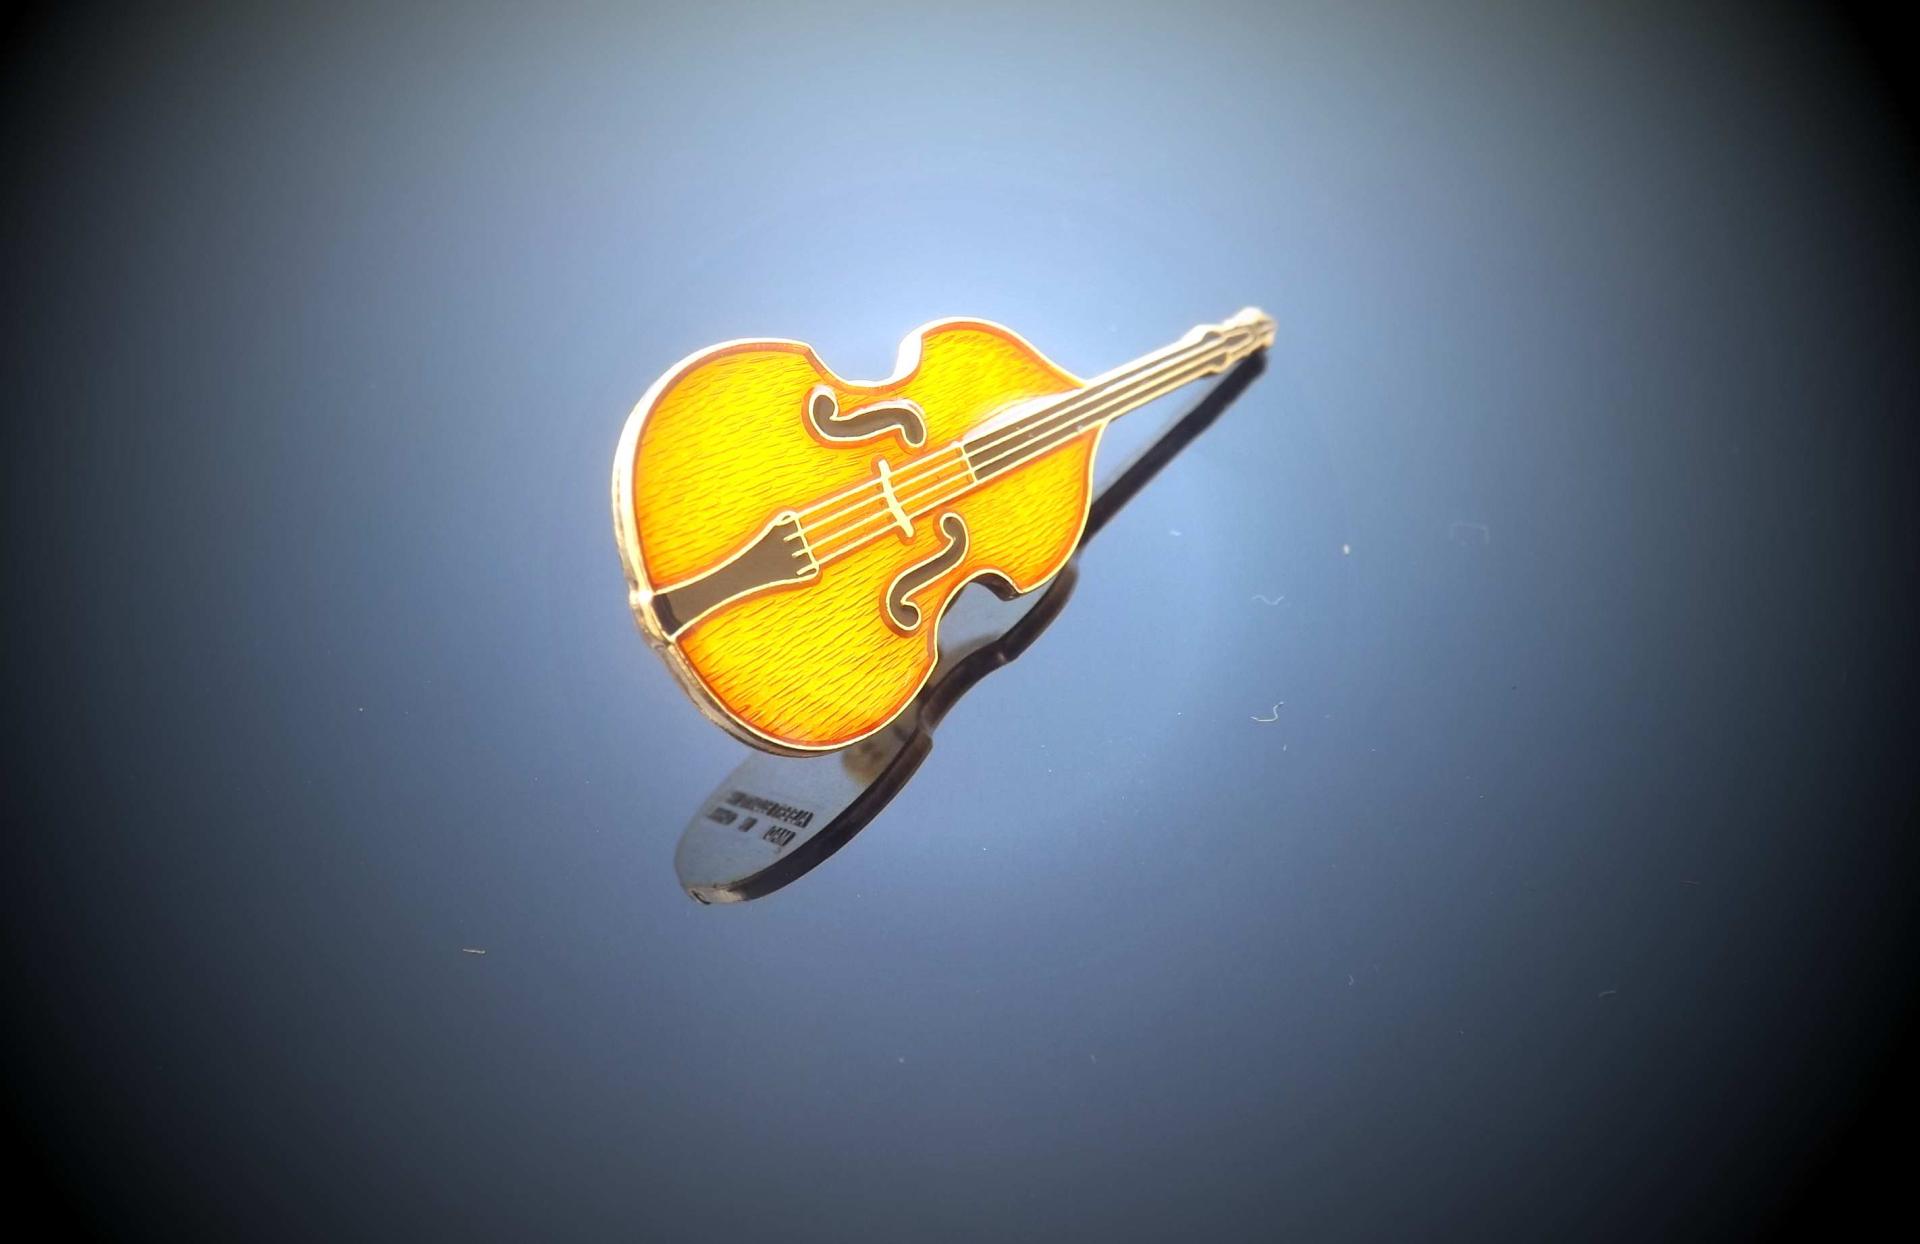 Upright Double Bass Pin Badge